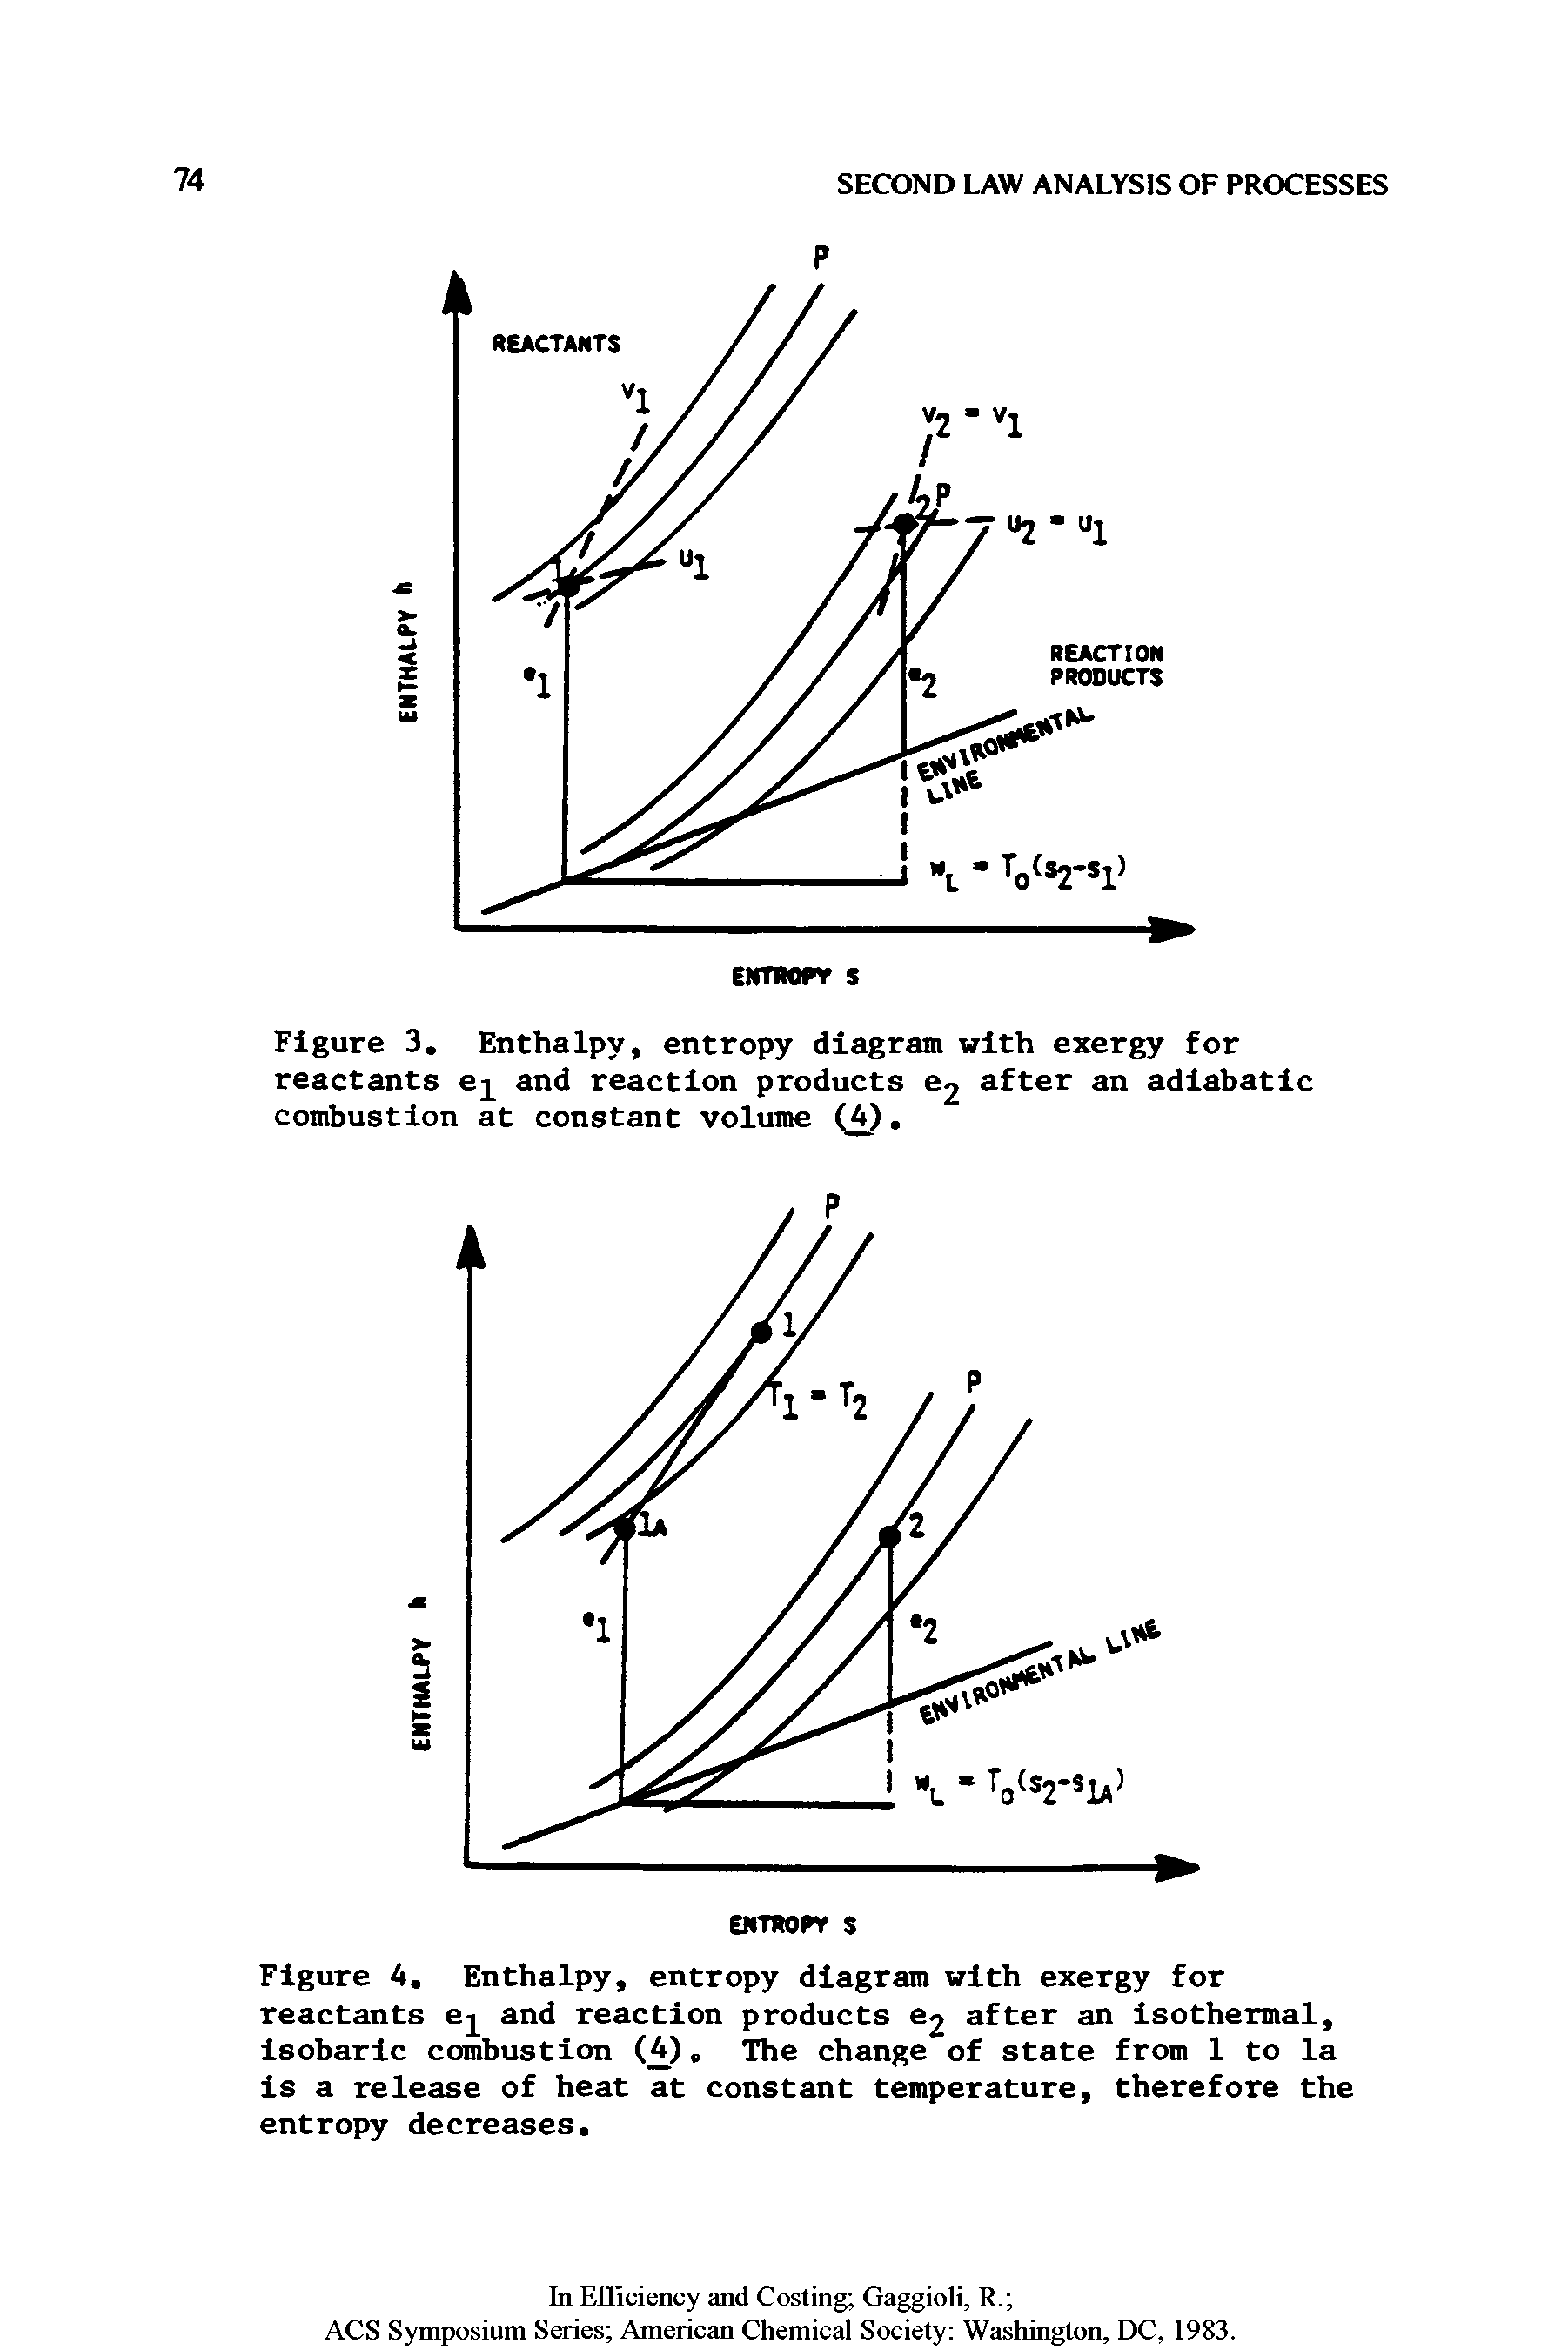 Figure 4. Enthalpy, entropy diagram with exergy for reactants e- and reaction products 2 after an isothermal, isobaric combustion Q4) The change of state from 1 to la is a release of heat at constant temperature, therefore the entropy decreases.